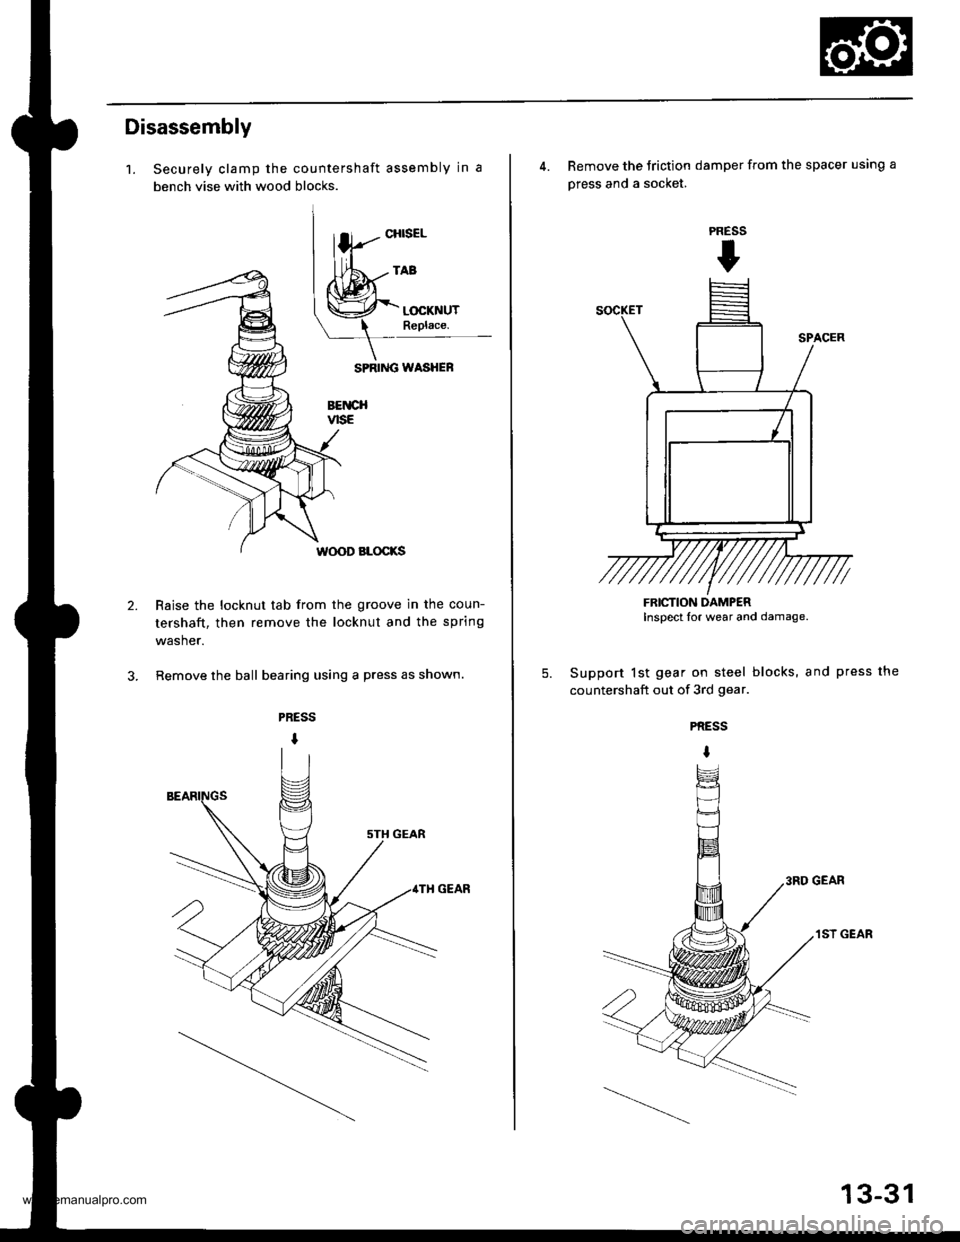 HONDA CR-V 1998 RD1-RD3 / 1.G Workshop Manual 
Disassembly
1.
2.
Securely clamp the countershaft assembly in a
bench vise with wood blocks.
SPRIiIG WASHEF
BETICHvtsE
W(X)D BLOCKS
Raise the locknut tab from the groove in the coun-
tershaft, then r